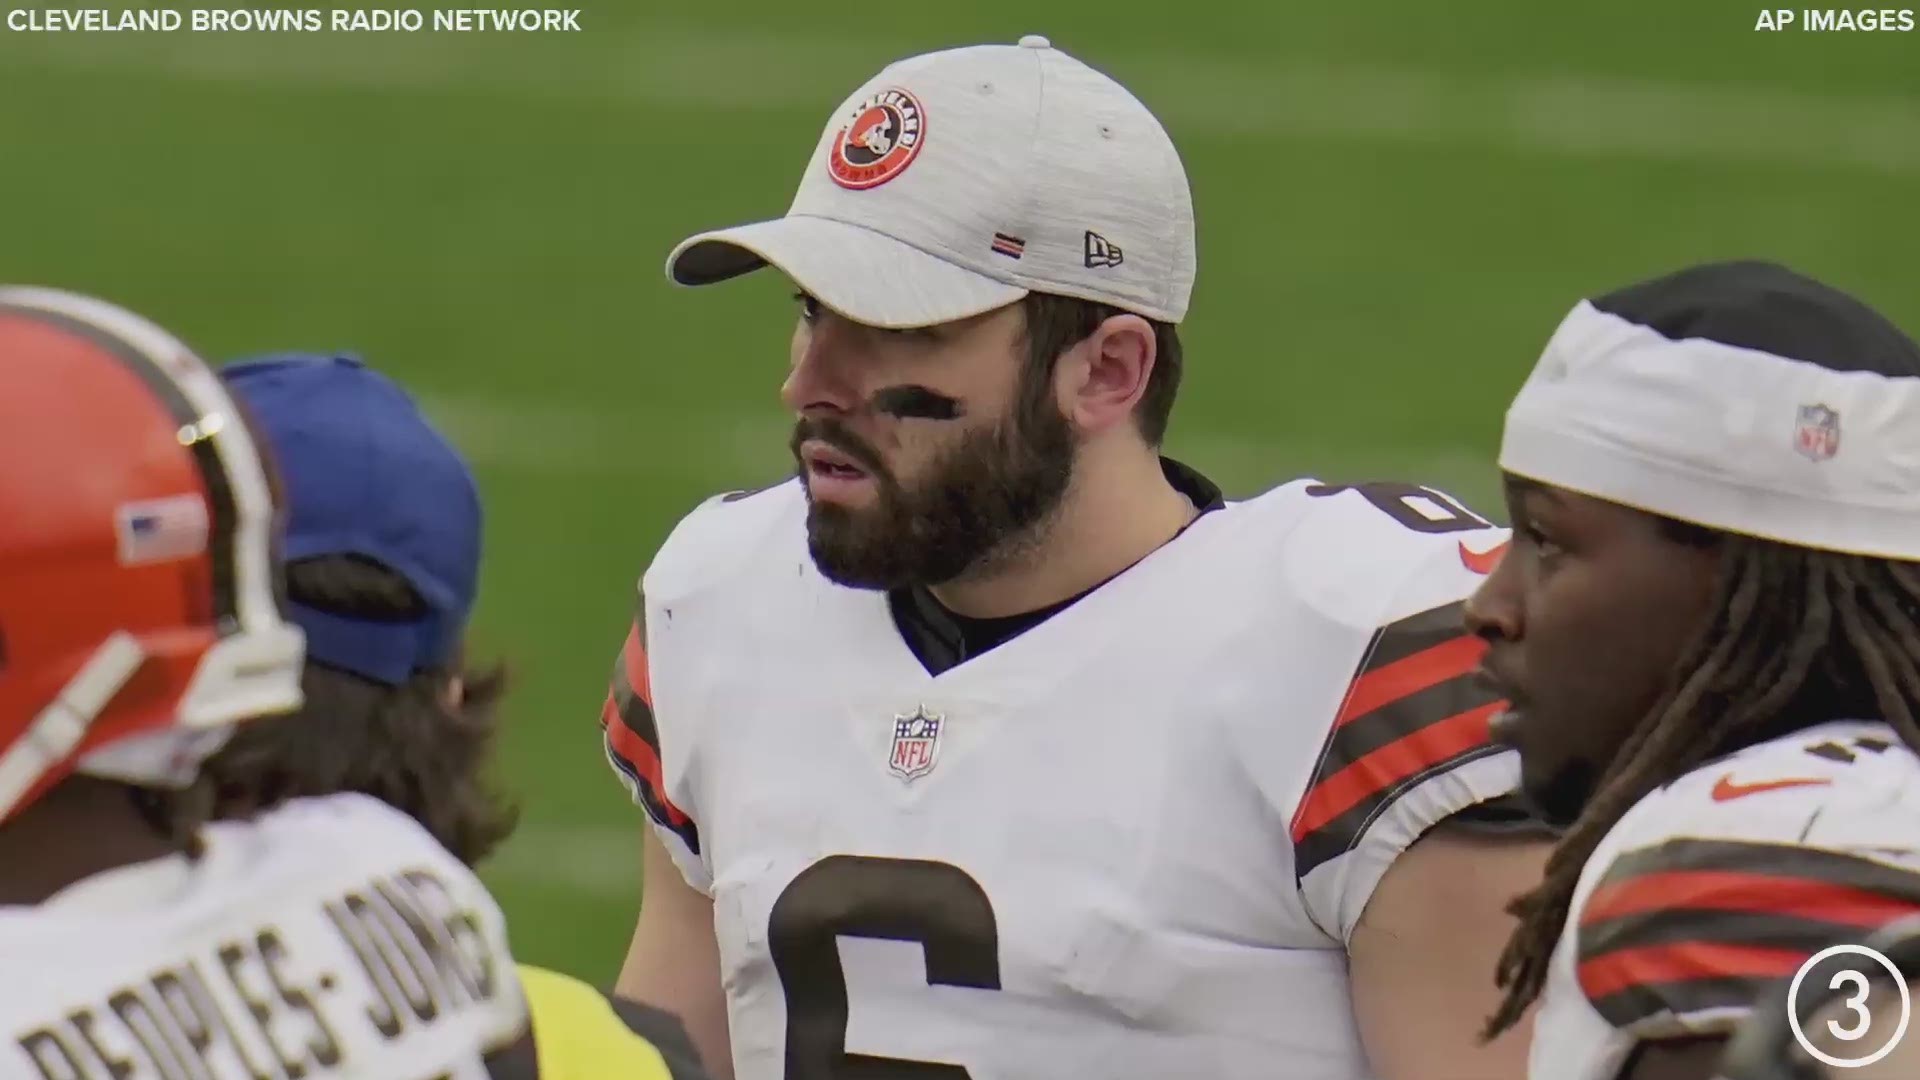 The Cleveland Browns sat quarterback Baker Mayfield in favor of Case Keenum in the second half of their Week 6 matchup vs. the Pittsburgh Steelers on Sunday.